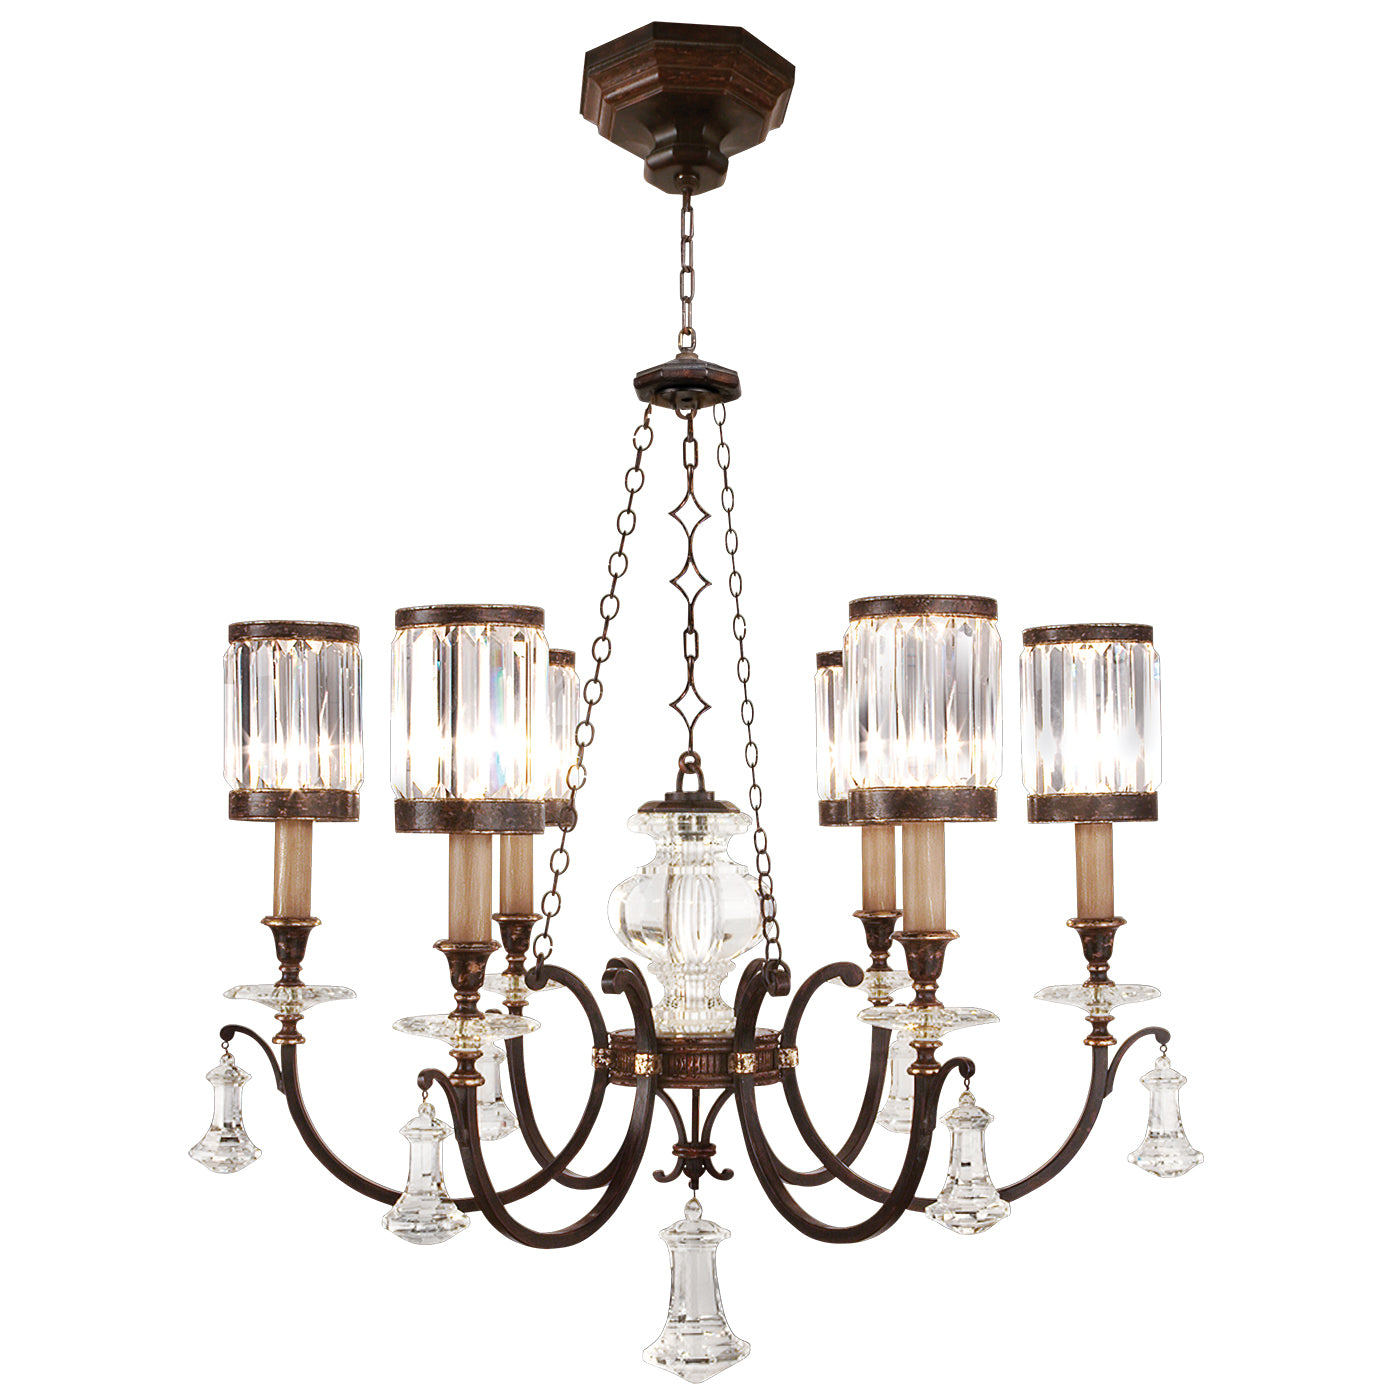 Fine Art Handcrafted Lighting Eaton Place Chandelier Chandeliers Fine Art Handcrafted Lighting Bronze 32 x 37 